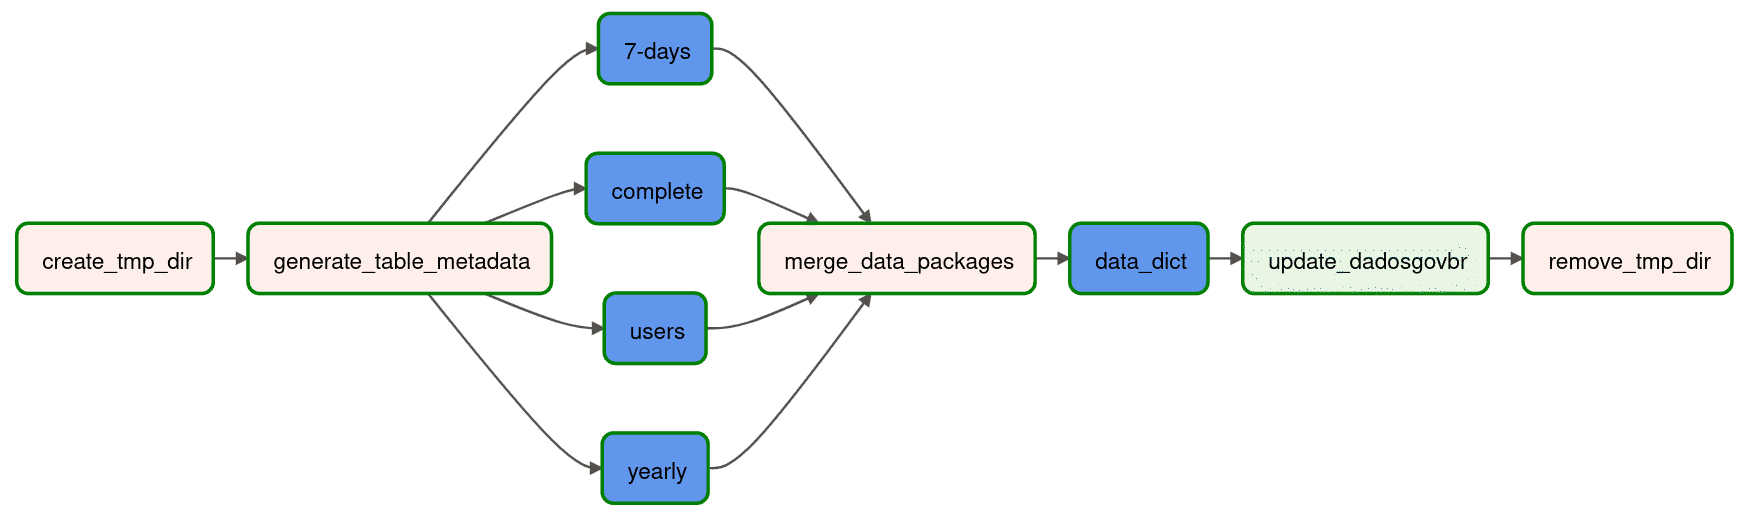 example workflow of a DAG in Airflow